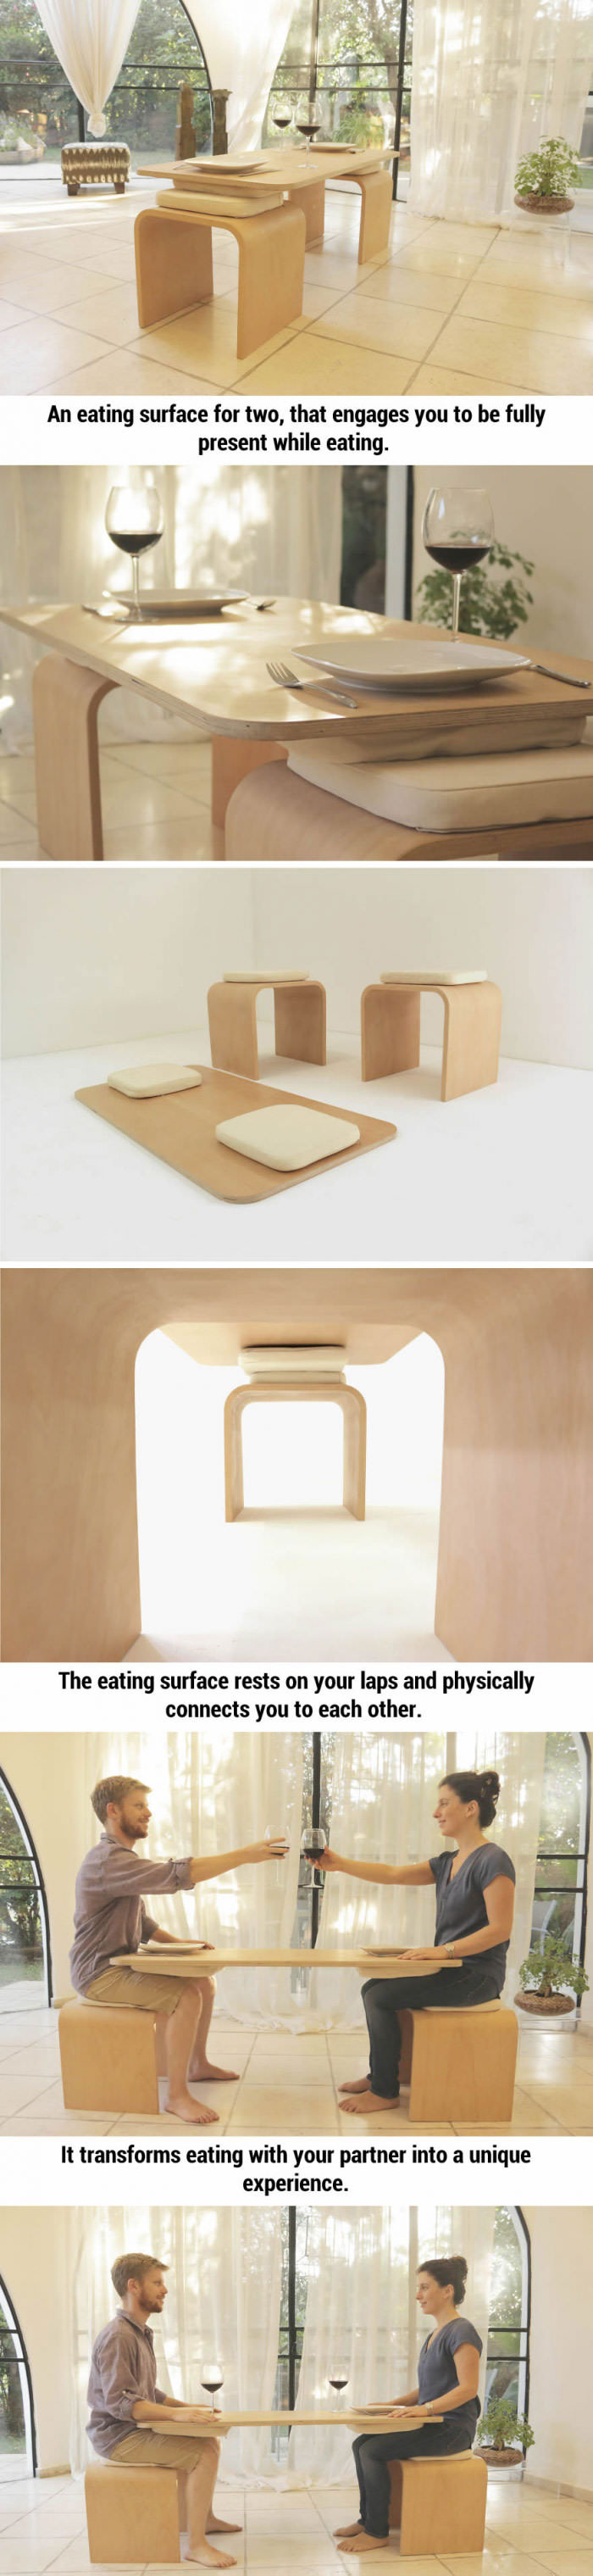 the symbiotic table for couples